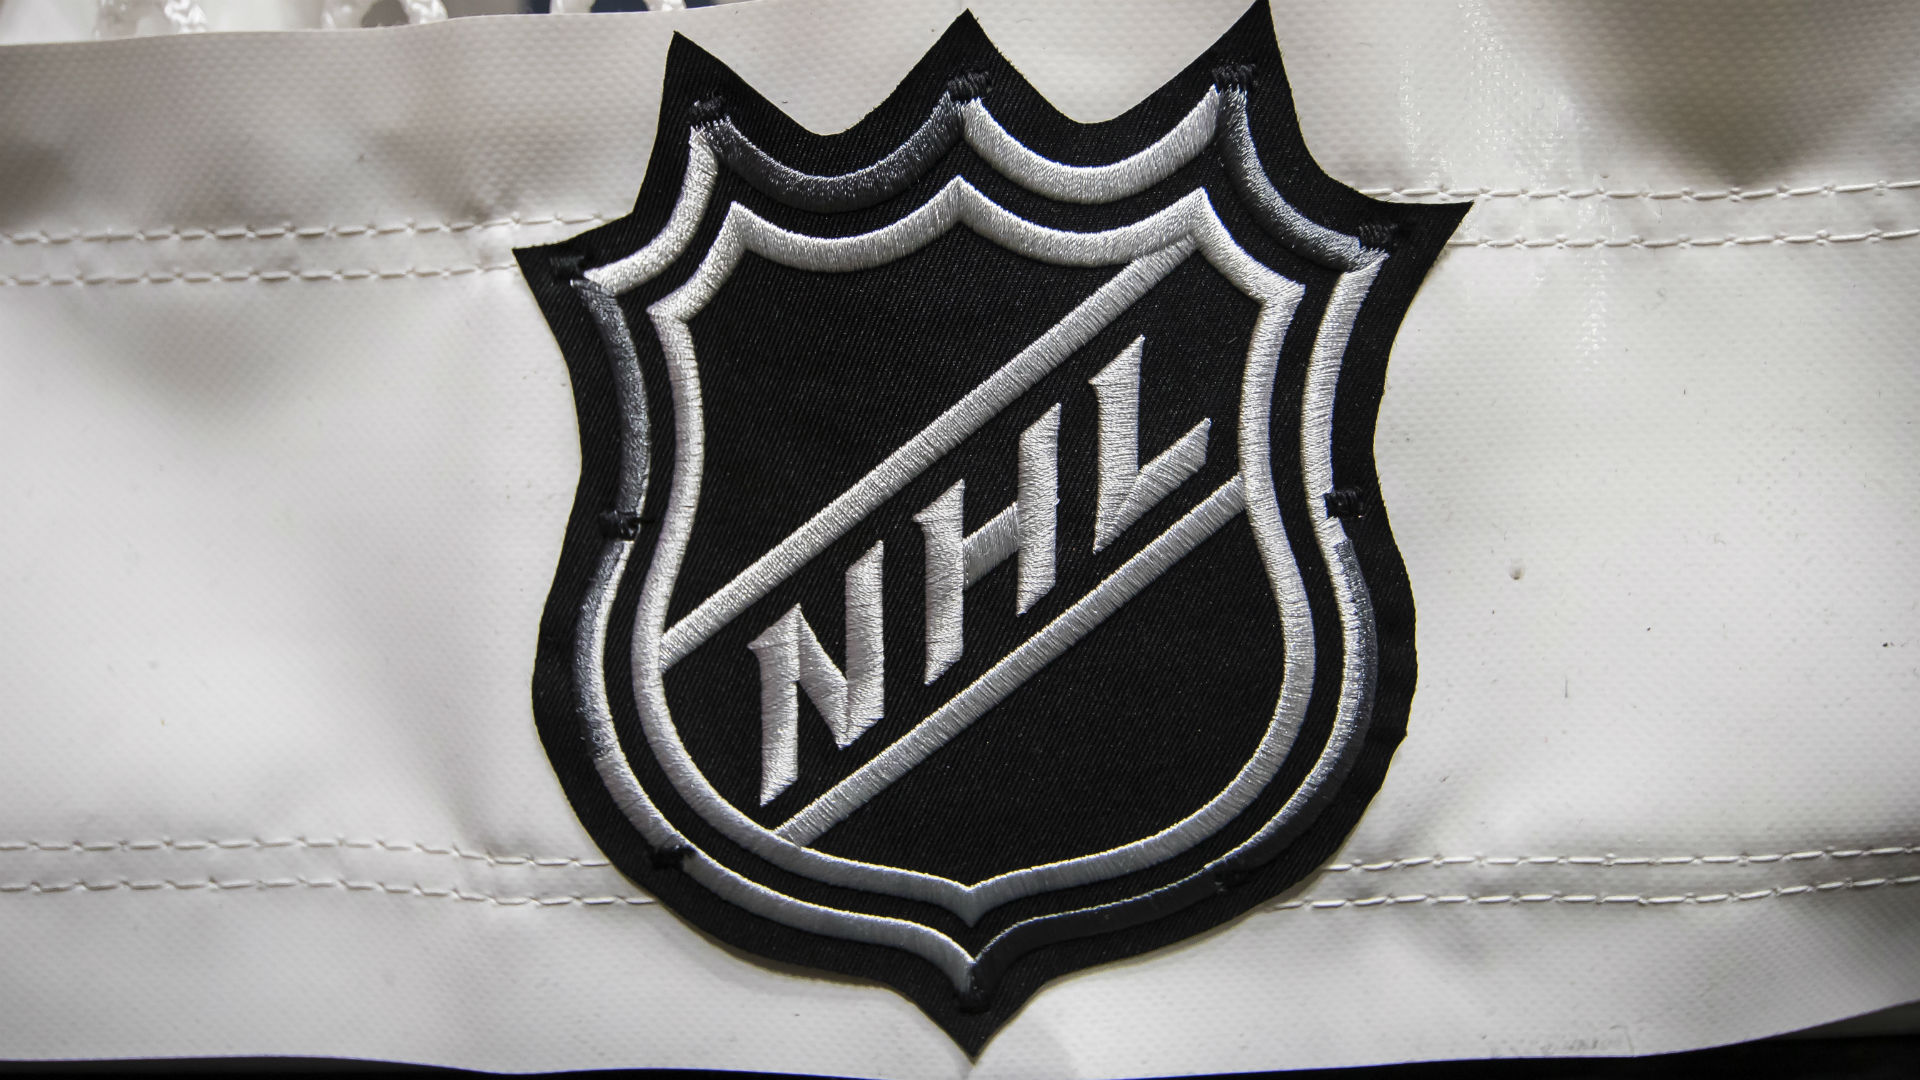 Coronavirus: NHL to cut league office employee pay by 25 per cent